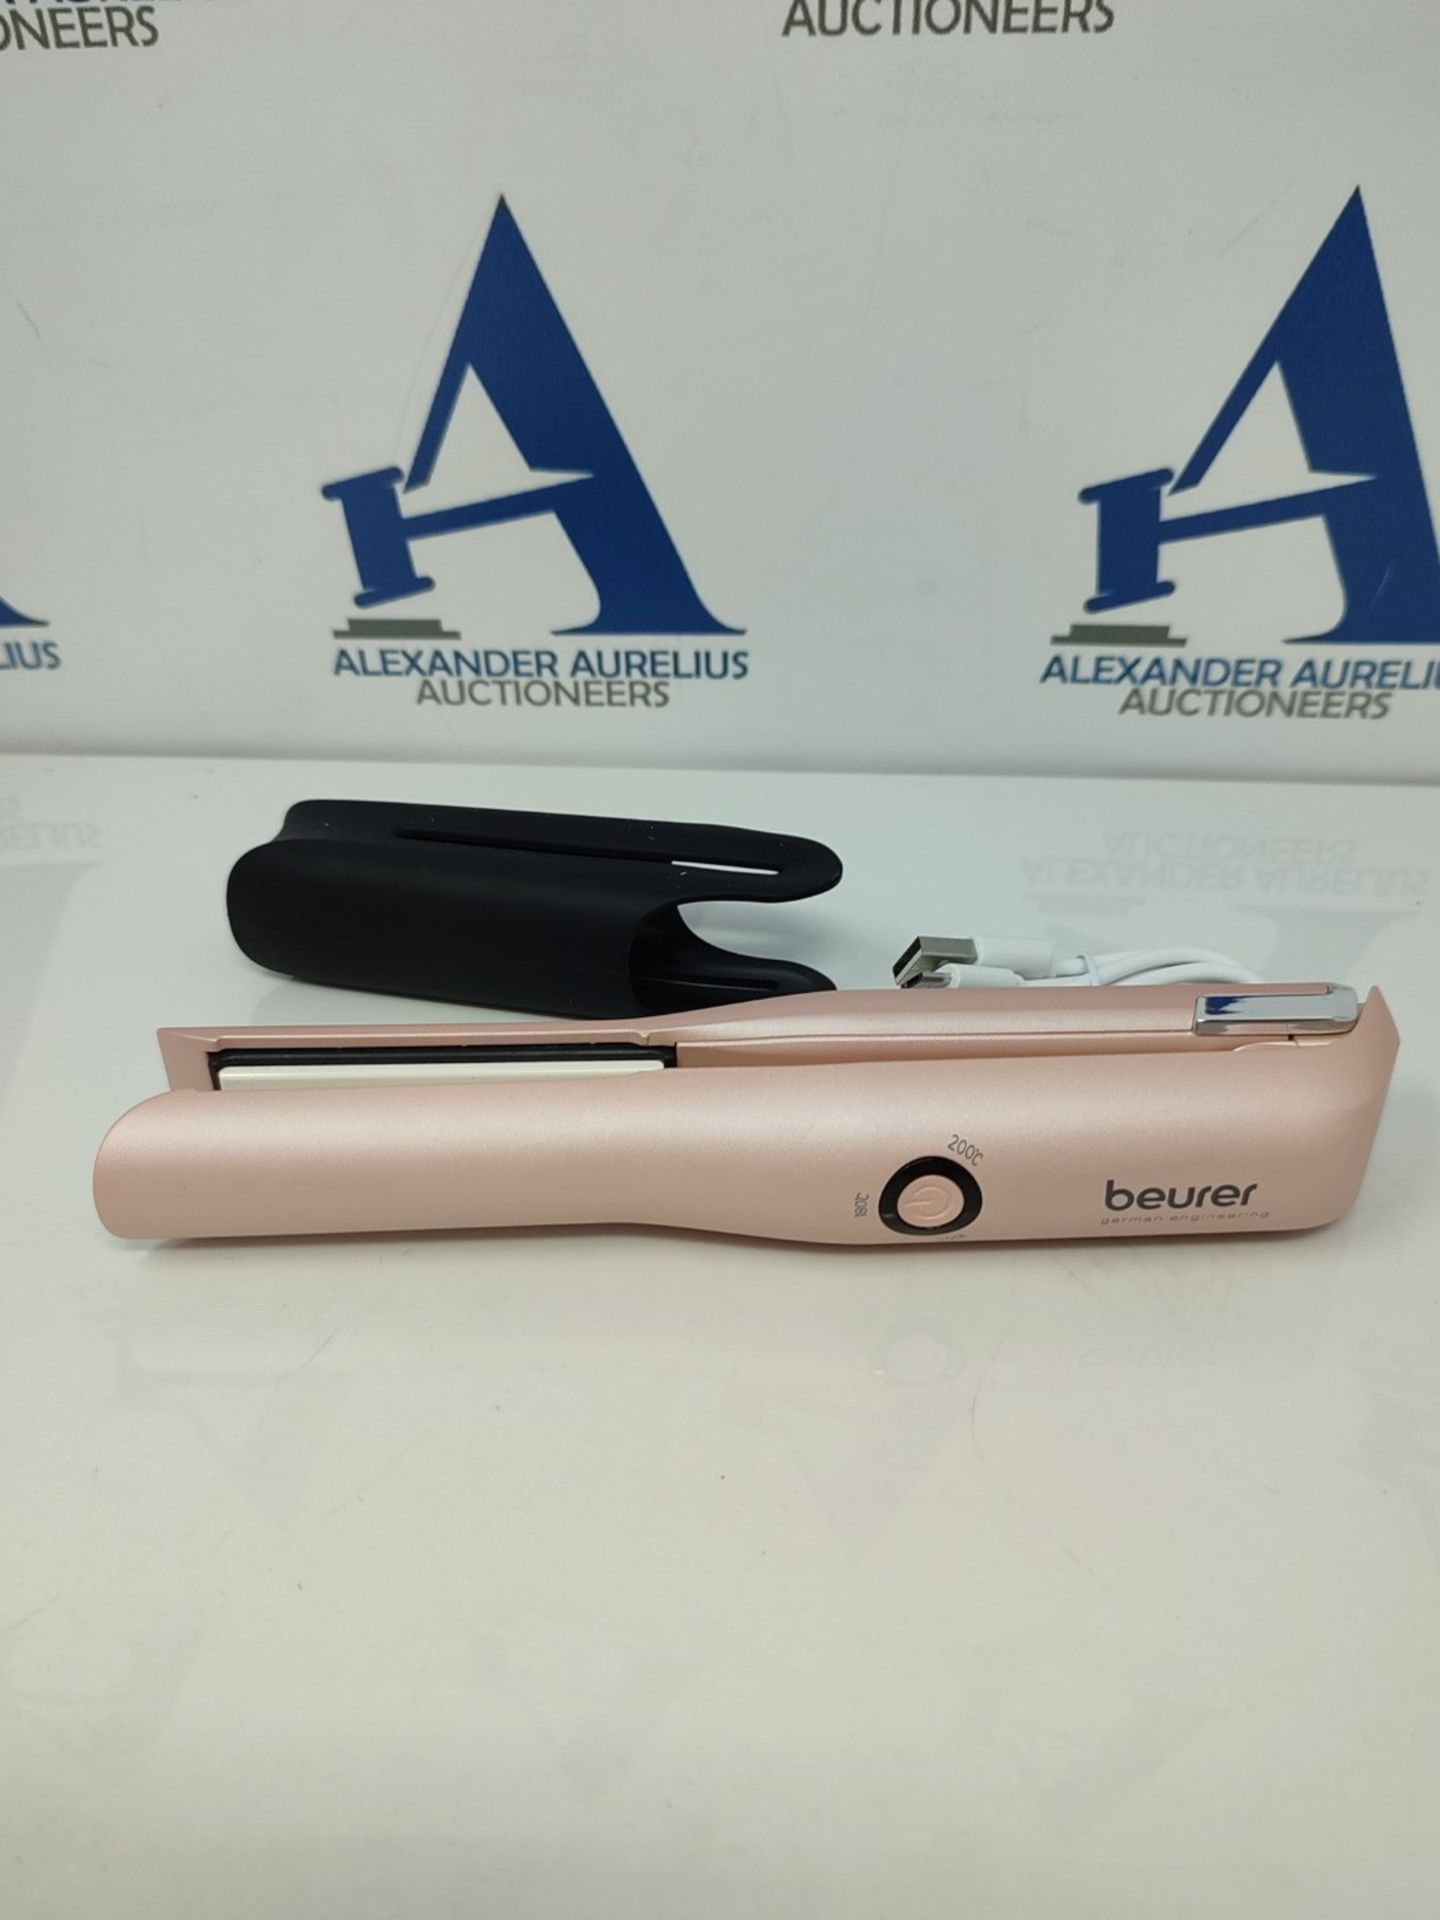 Beurer HS20 Cordless Rechargeable Hair Straightener With USB Charging Cable, 3 Fast-He - Image 2 of 3